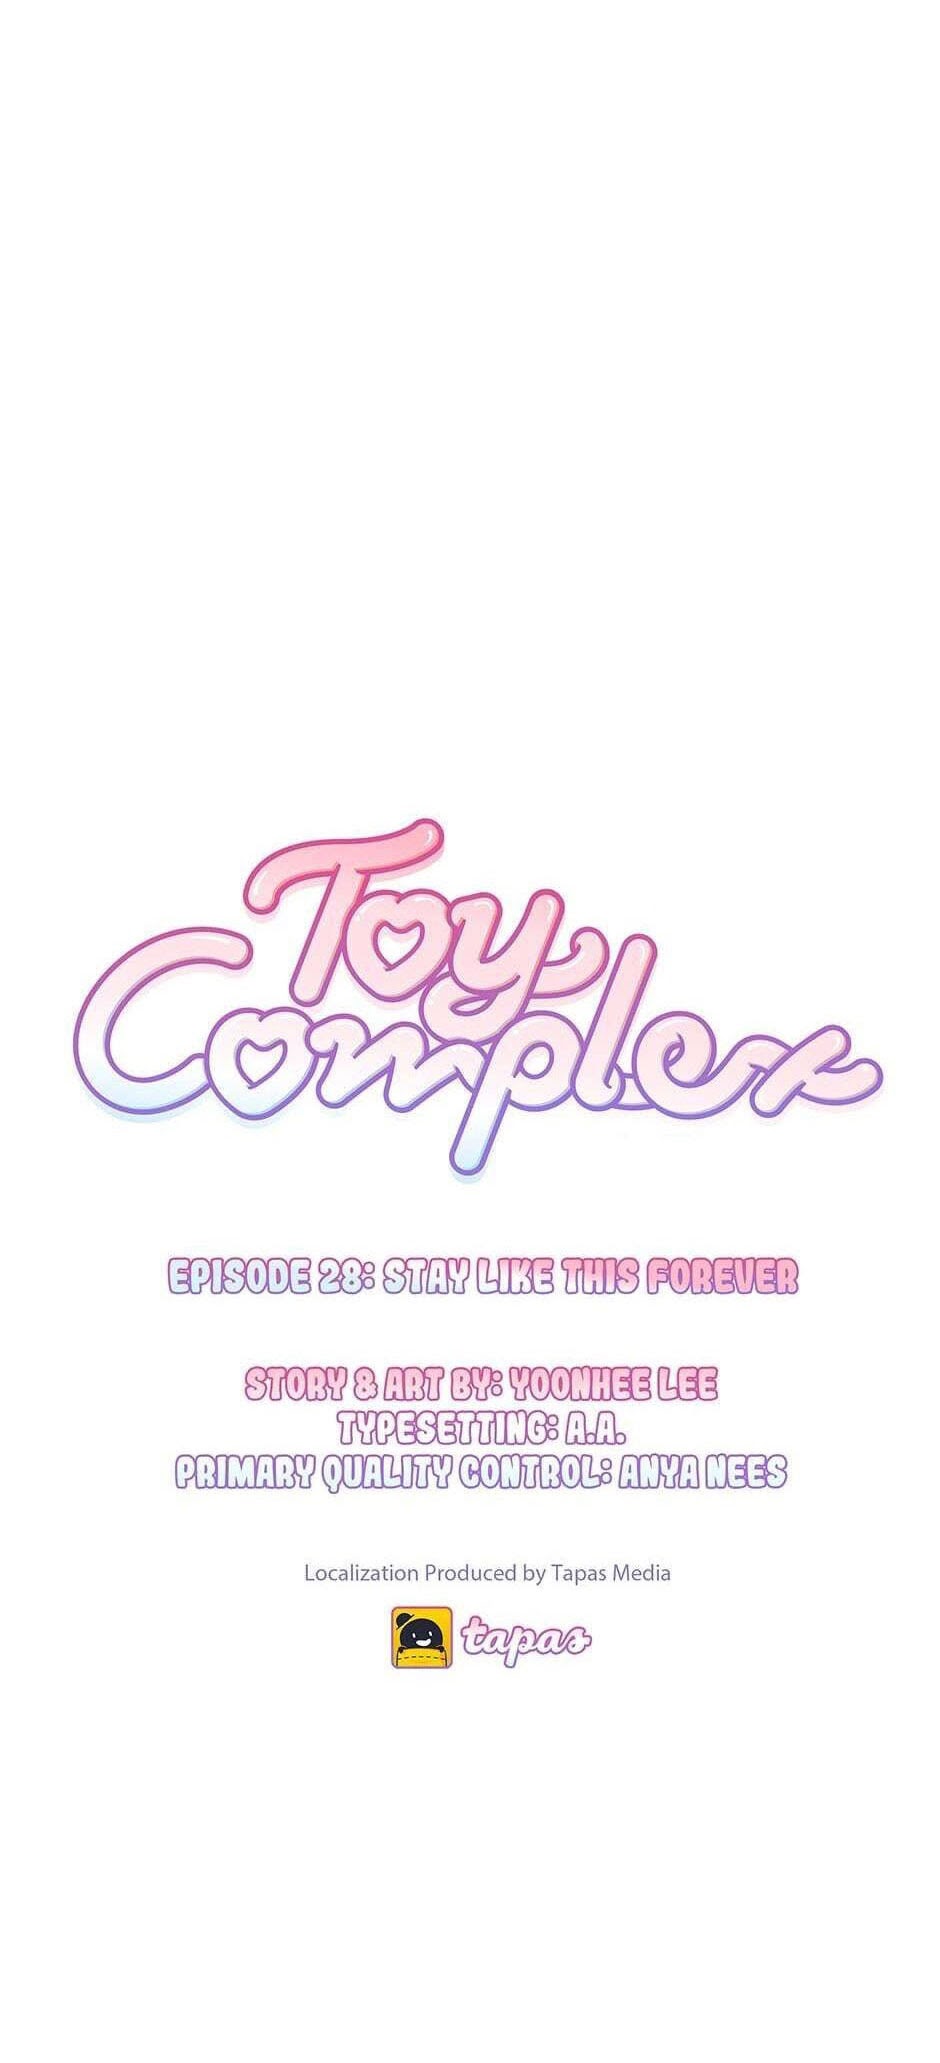 [18+] Toy Complex